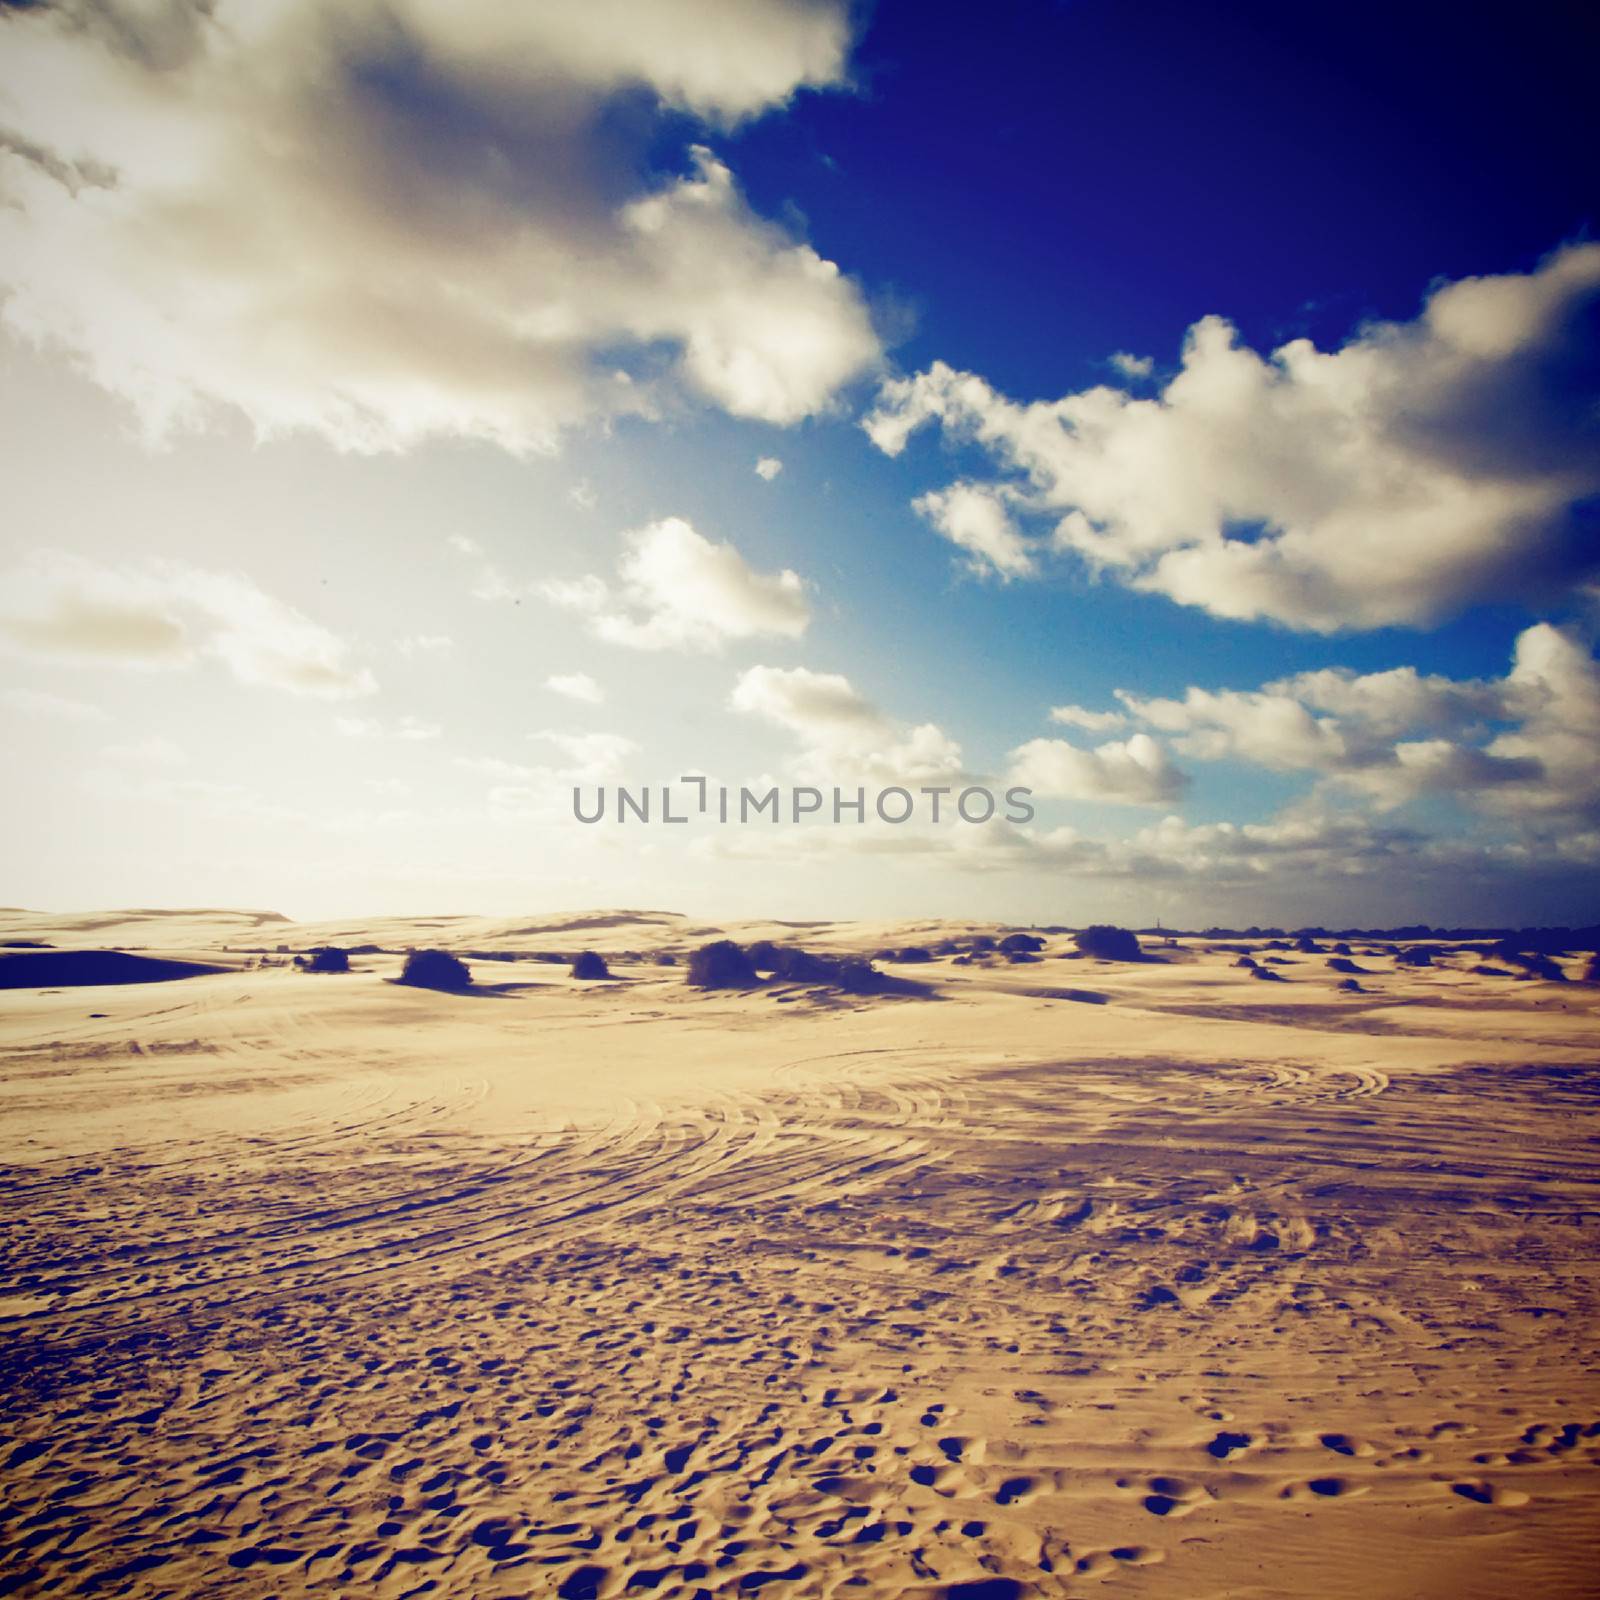 Landscape of dessert with blue sky, retro filter effect by nuchylee